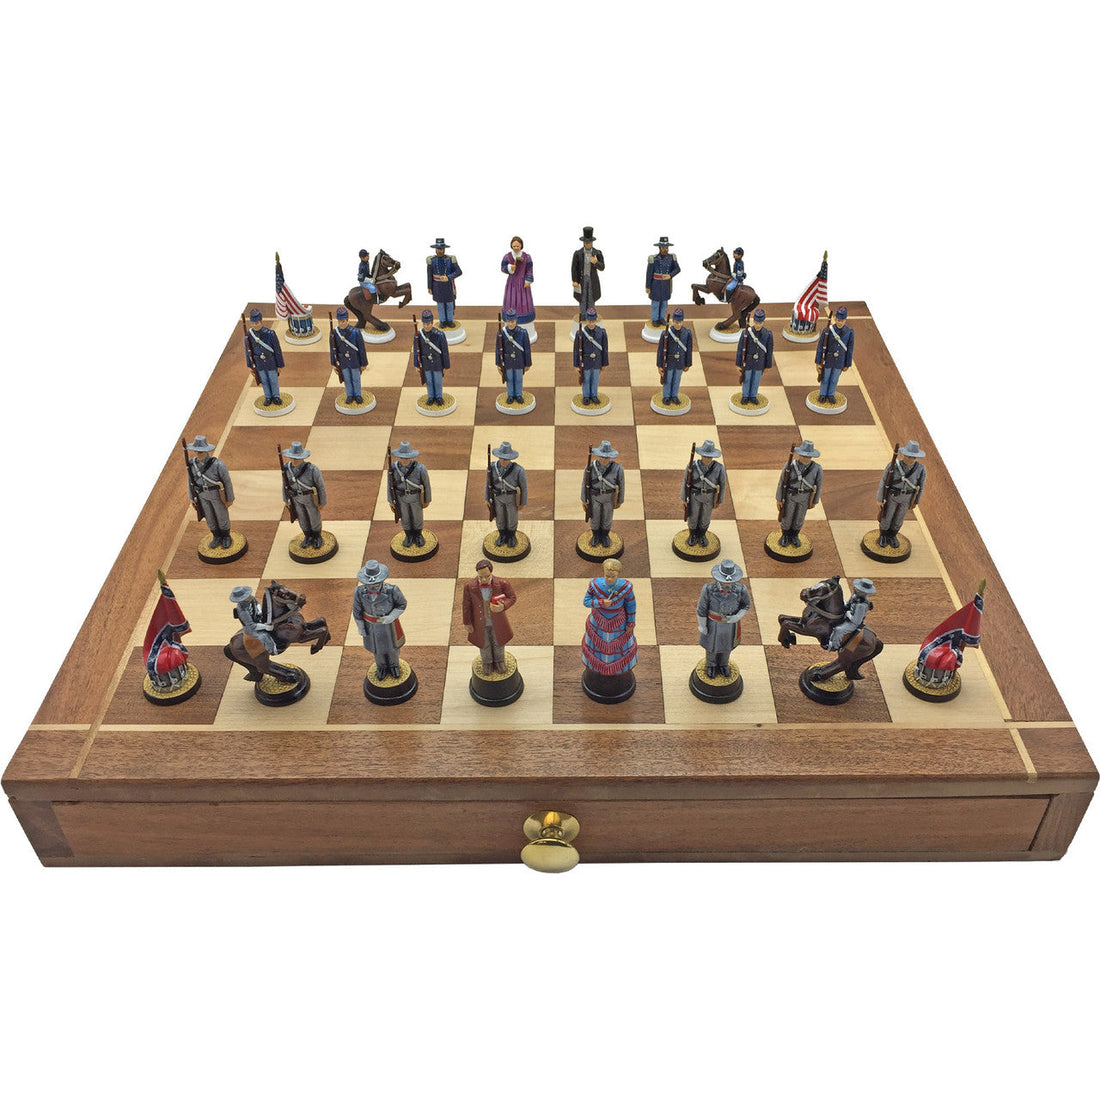 Historically Accurate Painted Chess Set